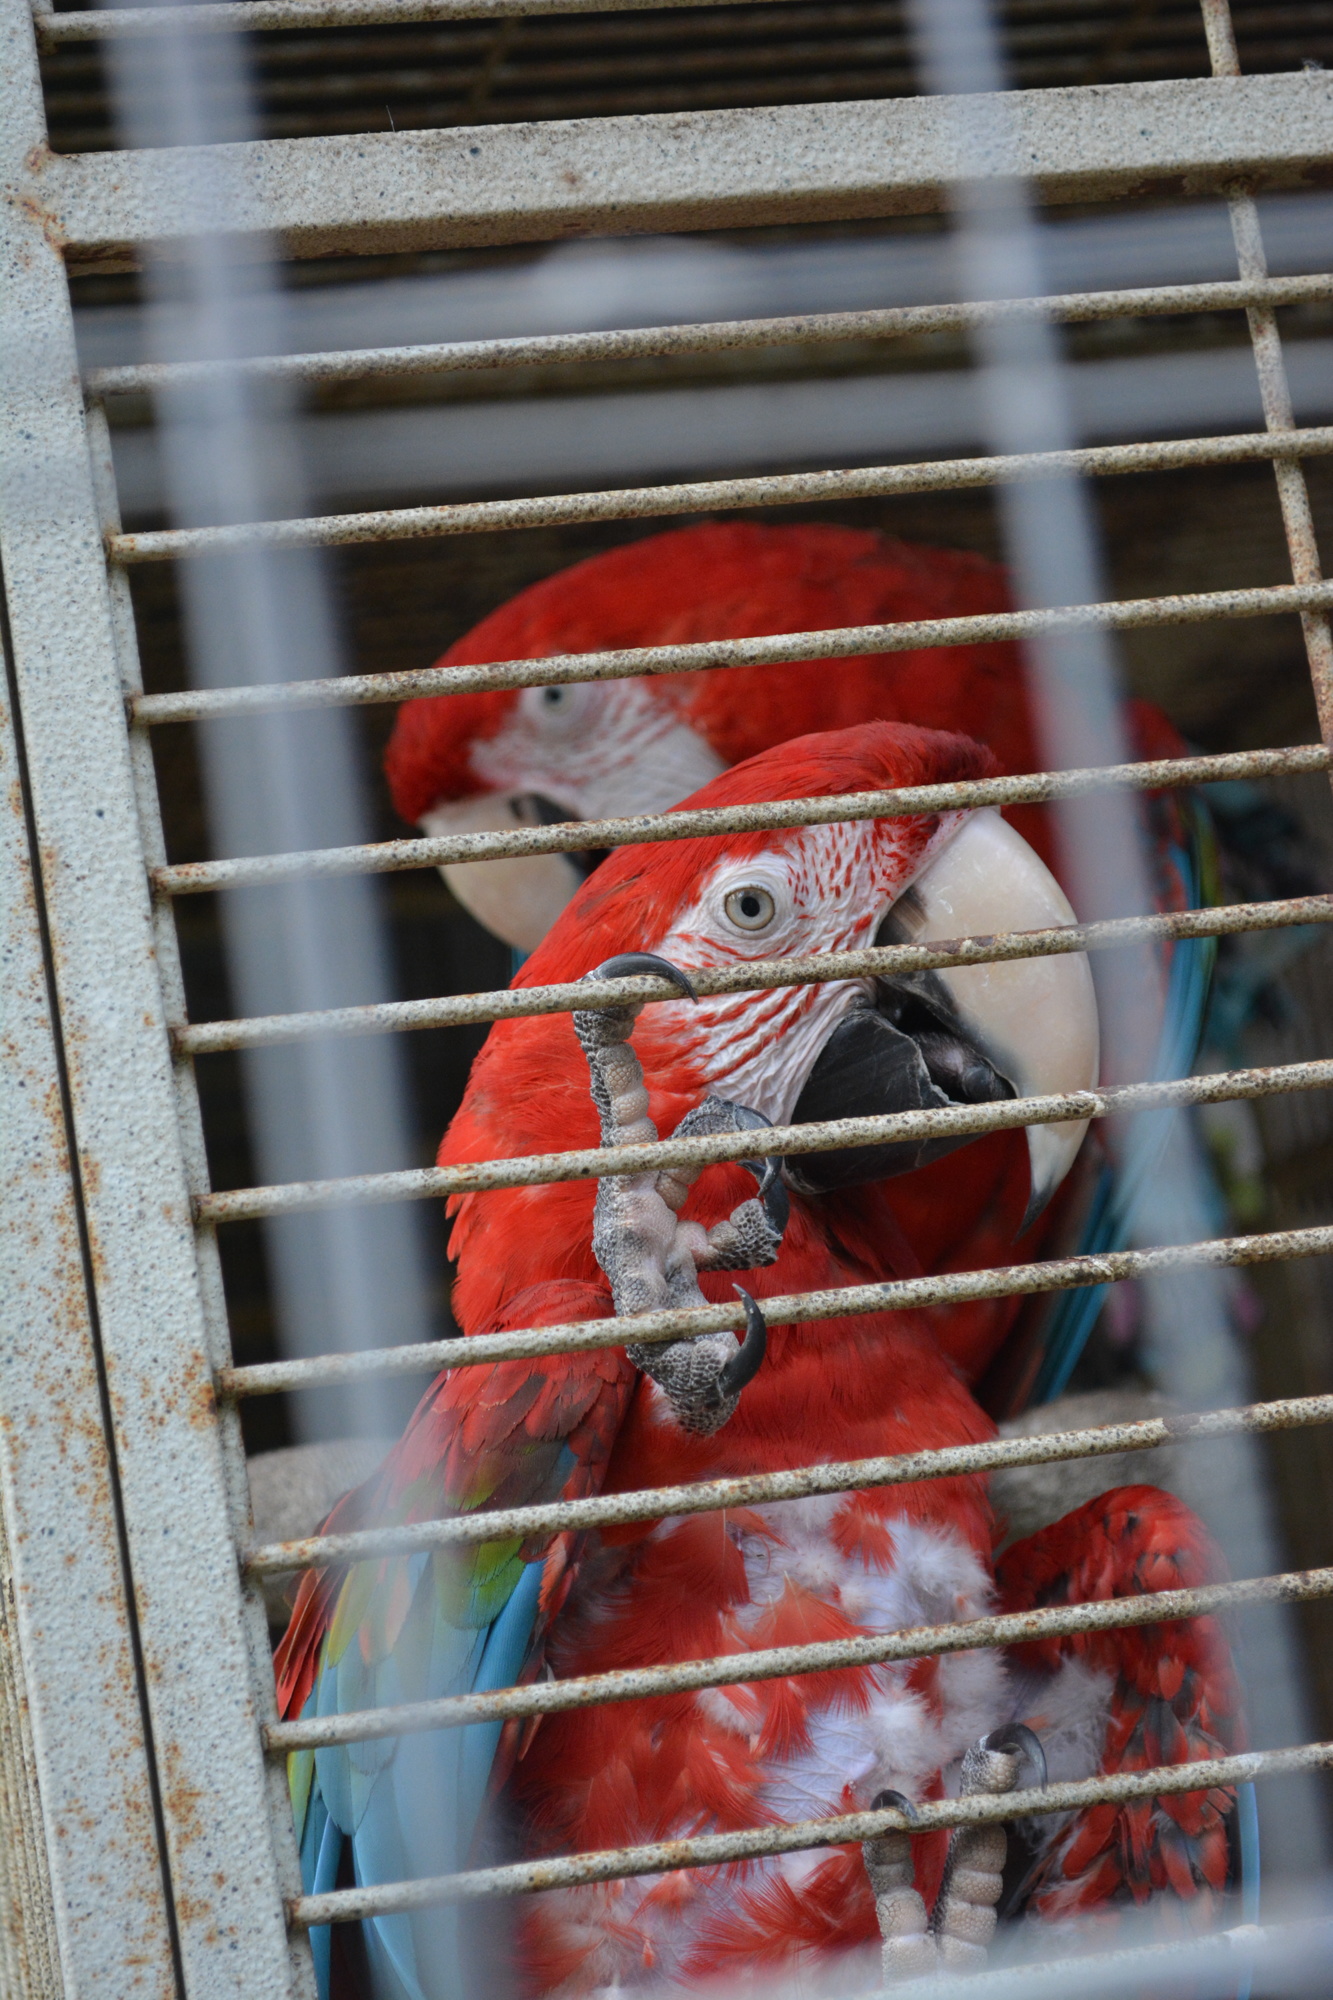 The count is up to 372 parrots at Birds of Paradise and Debbie Huckaby said she could see the time when more than 1,000 parrots live on the site.